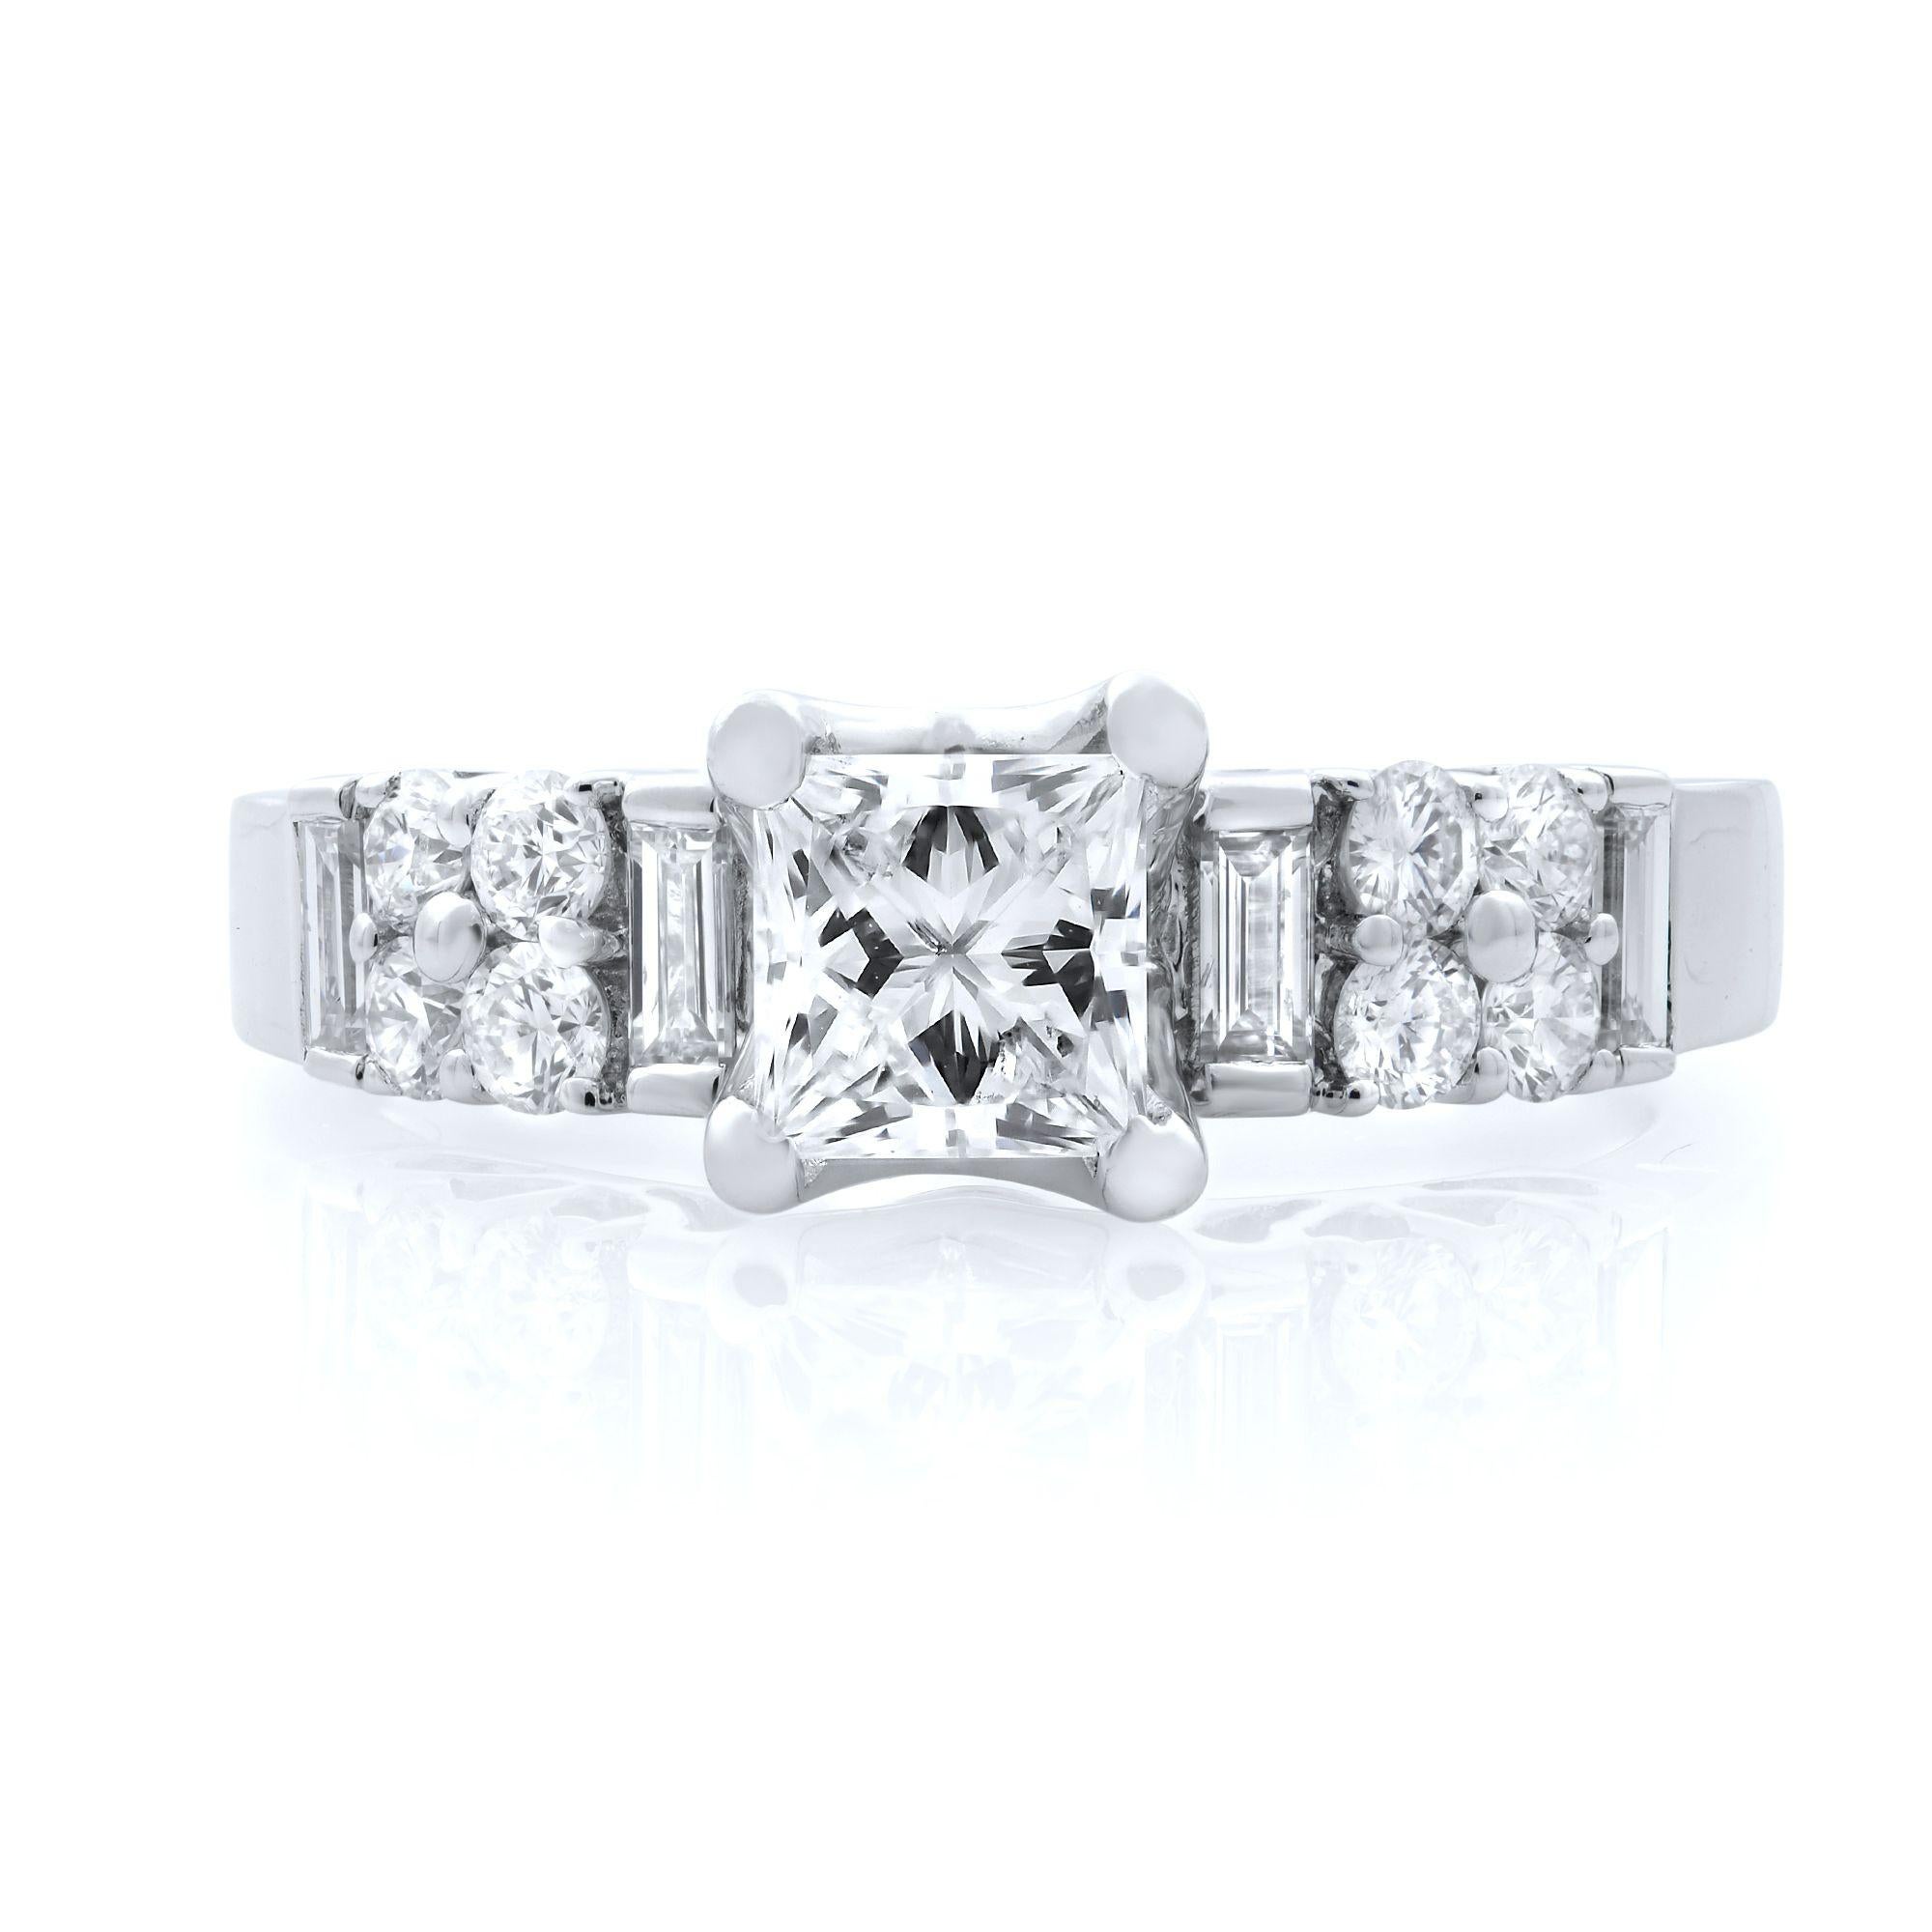 Stunning women’s princess cut diamond engagement ring crafted in 18k white gold. This beautiful ring features 0.50 carat of princess cut center diamond with round and baguette shaped side diamonds. Total diamond weight: 1.50 carats. Diamond Color: